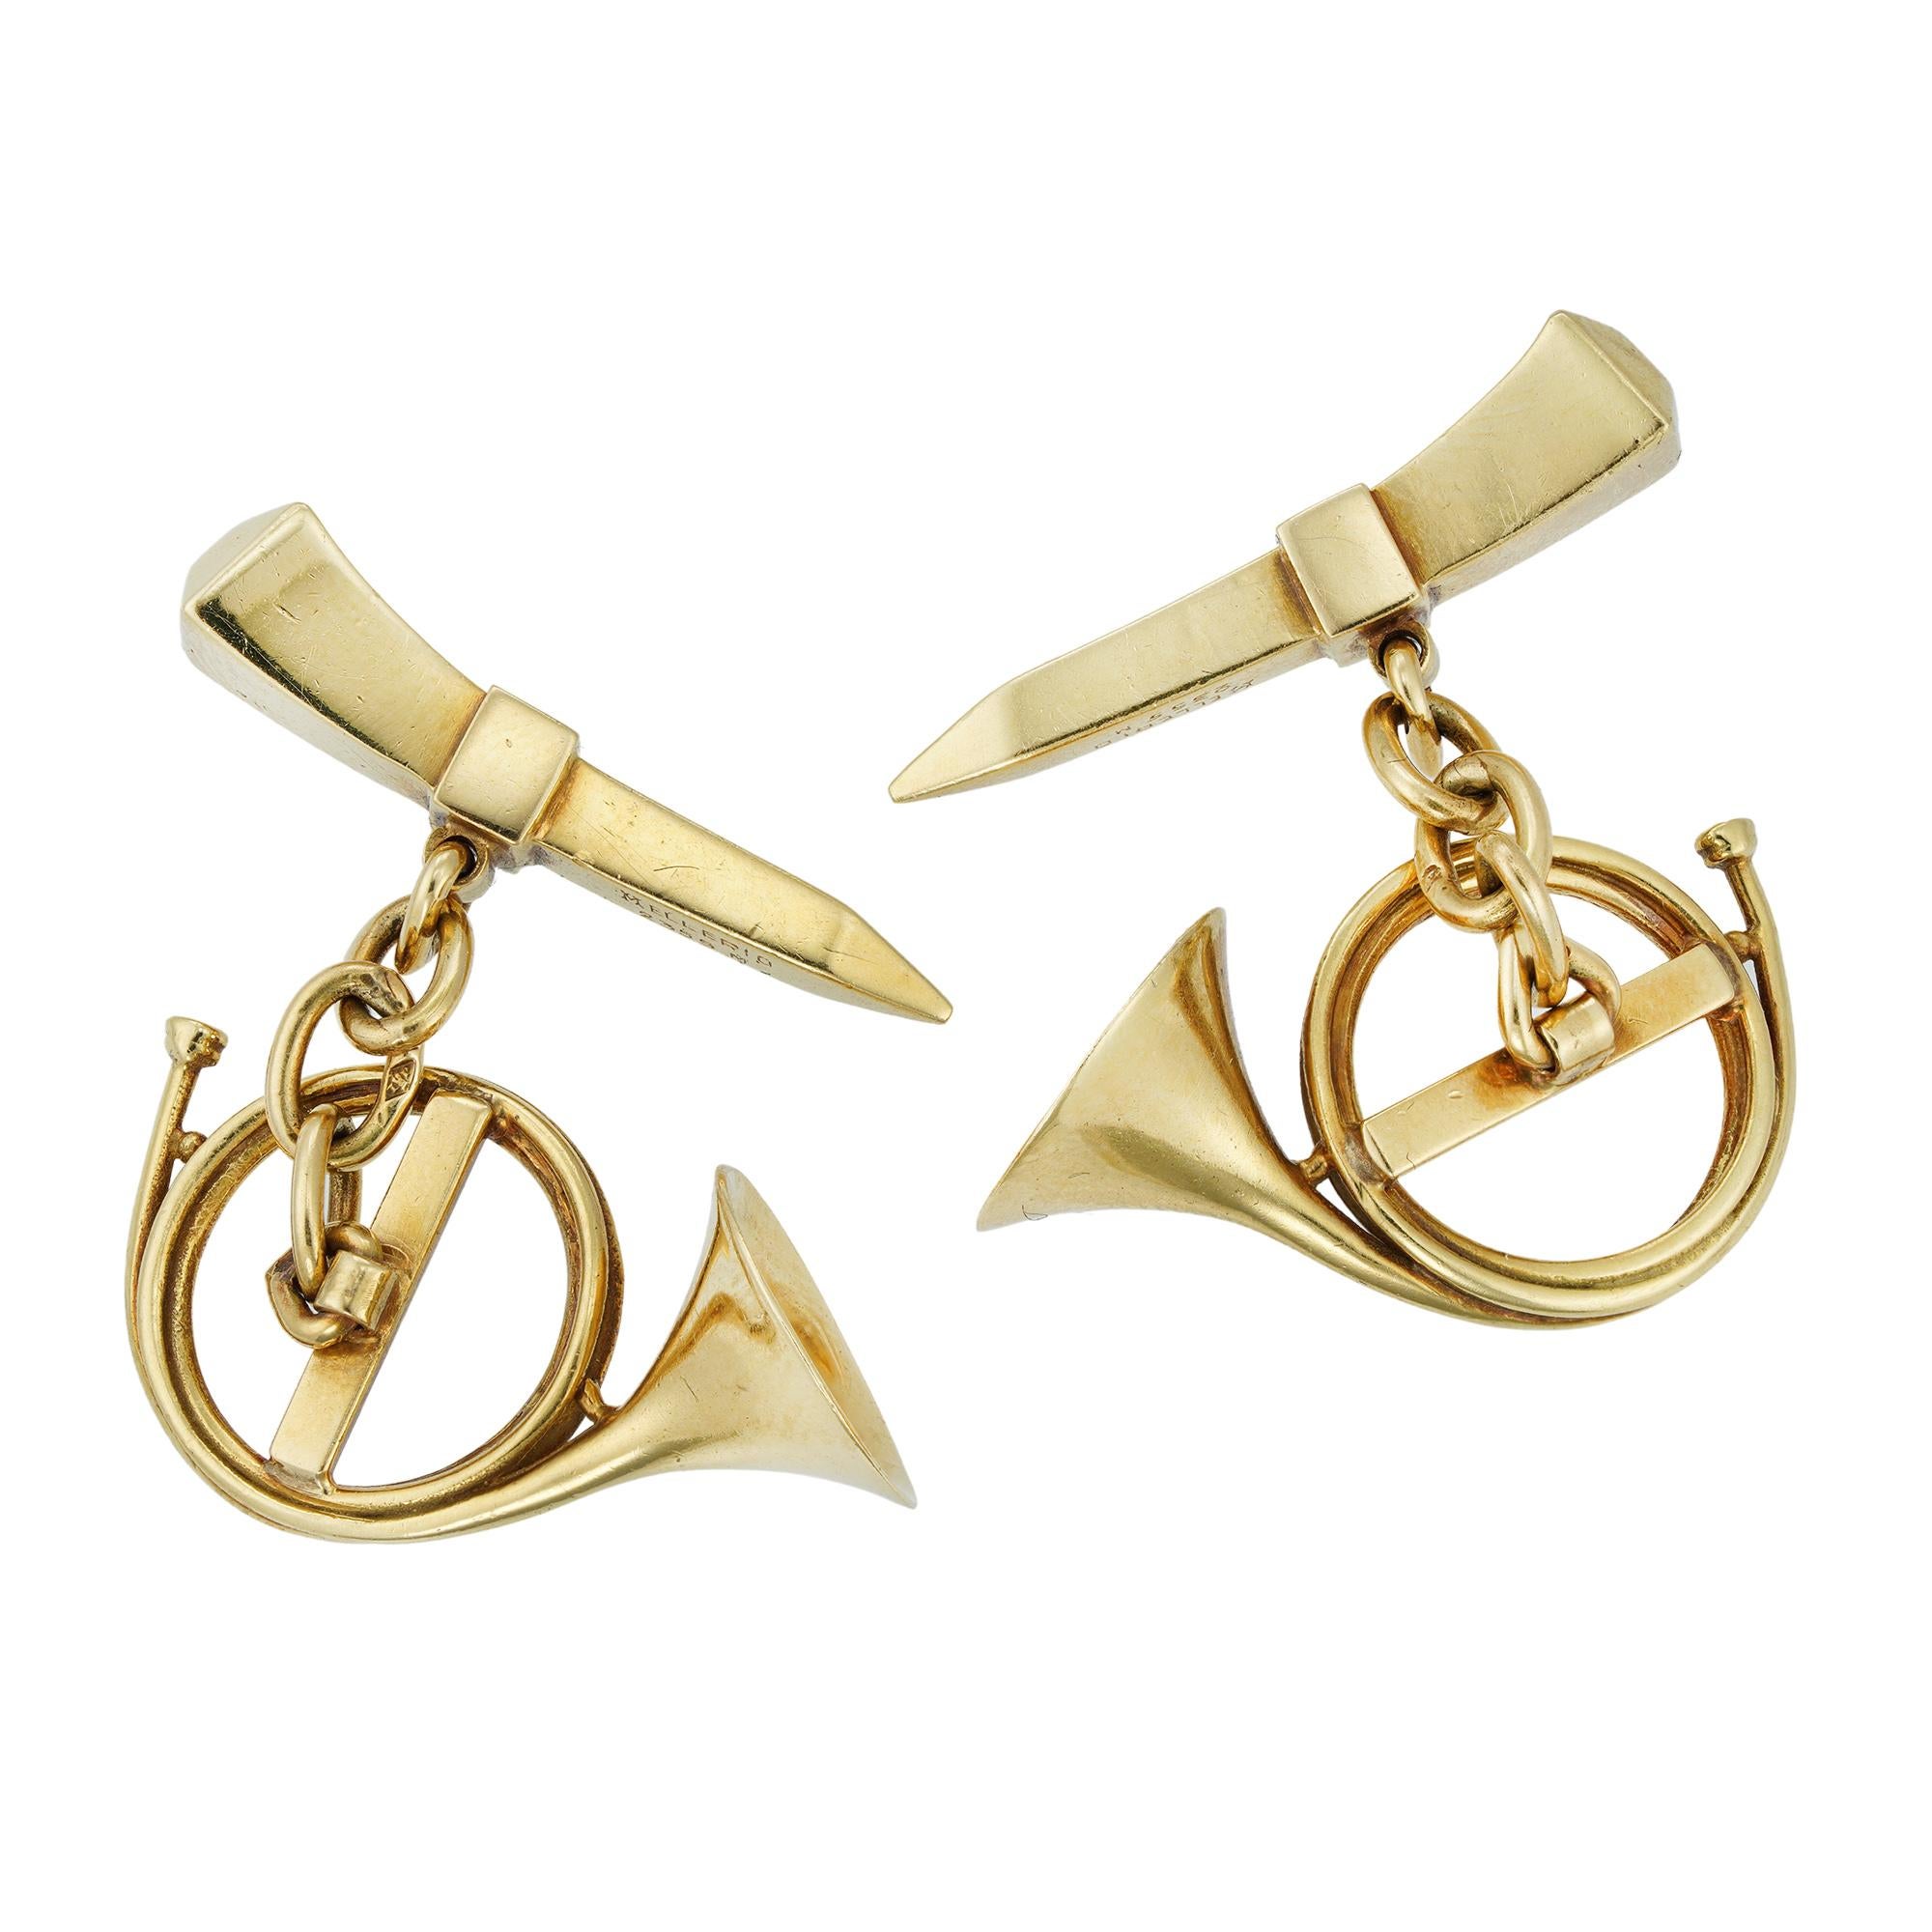 A fine pair of Turn-of-last-Century cufflinks, each cufflink comprising a nail and hunting horn motif, with chain fitting, all in yellow gold, signed Mellerio 2355M, bearing Fench hallmark for 18ct gold, circa 1900, the horm measuring approximately